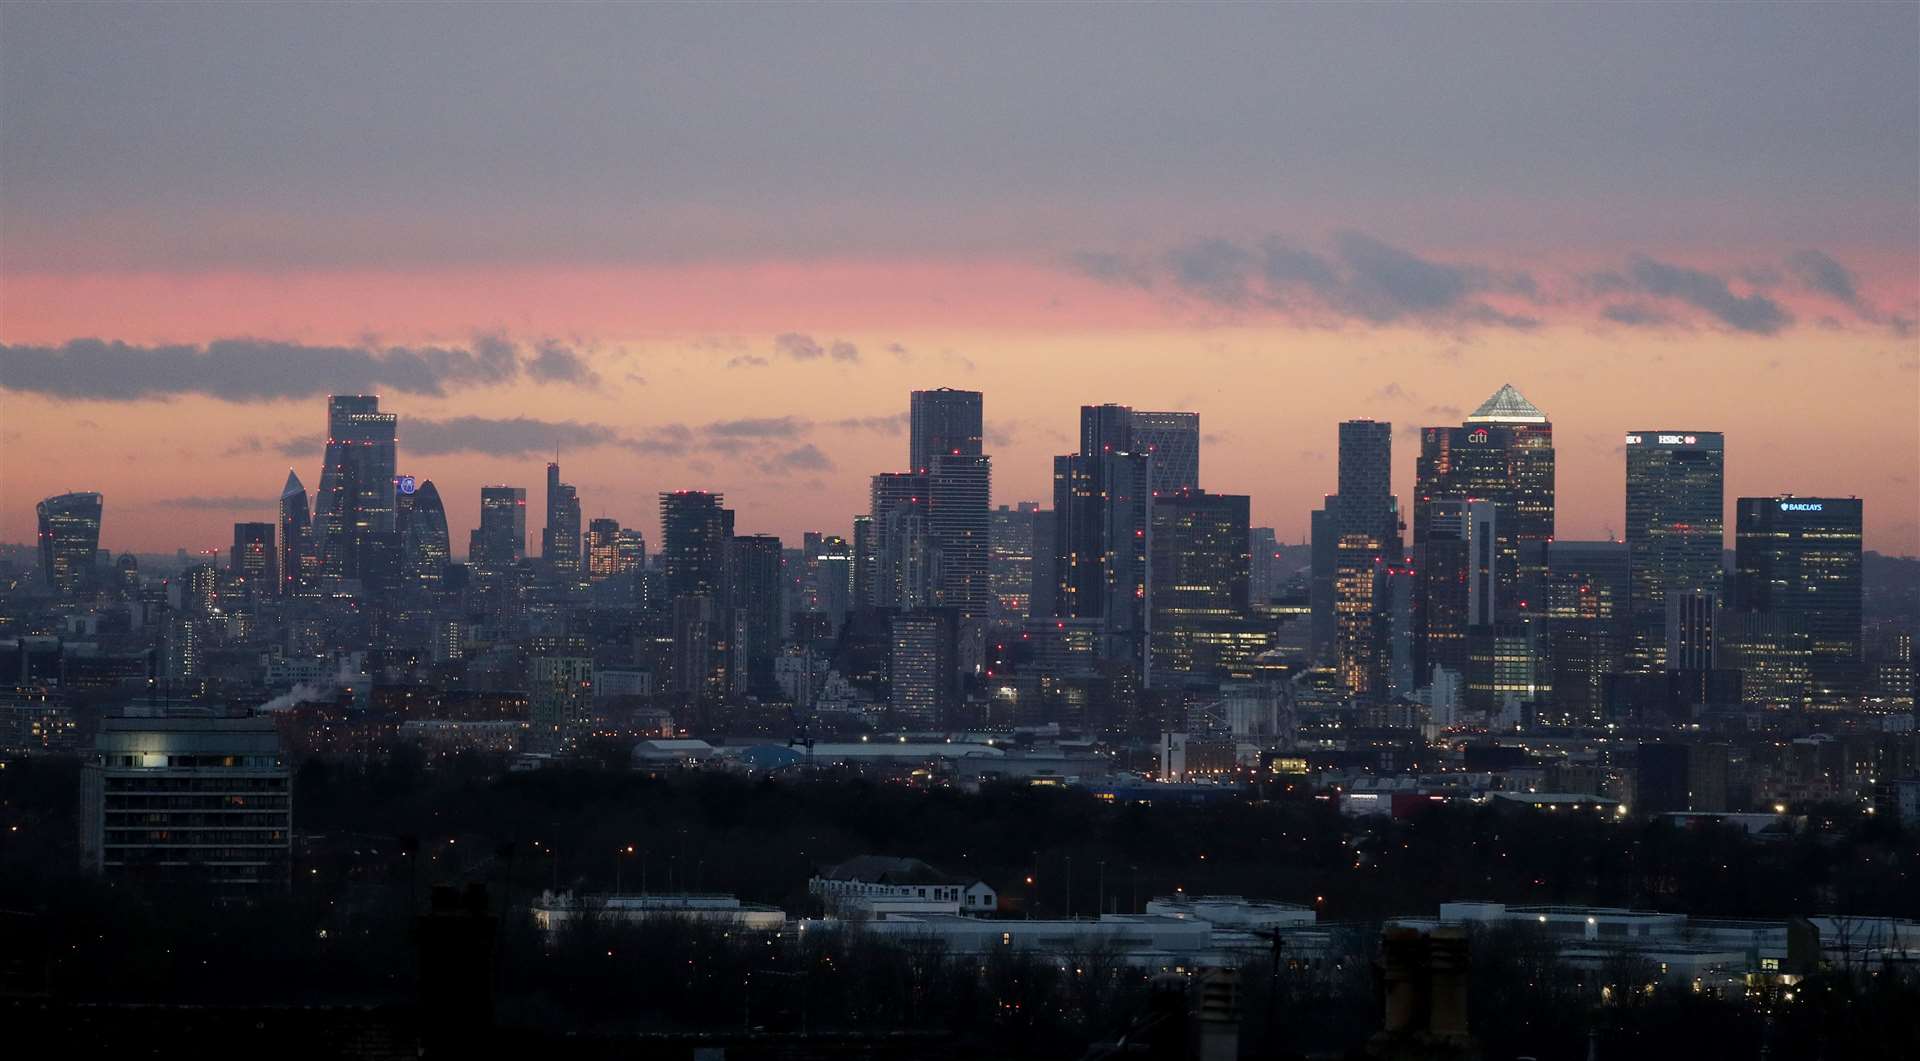 Cities such as London can significantly warmer than nearby rural areas (Jonathan Brady/PA)